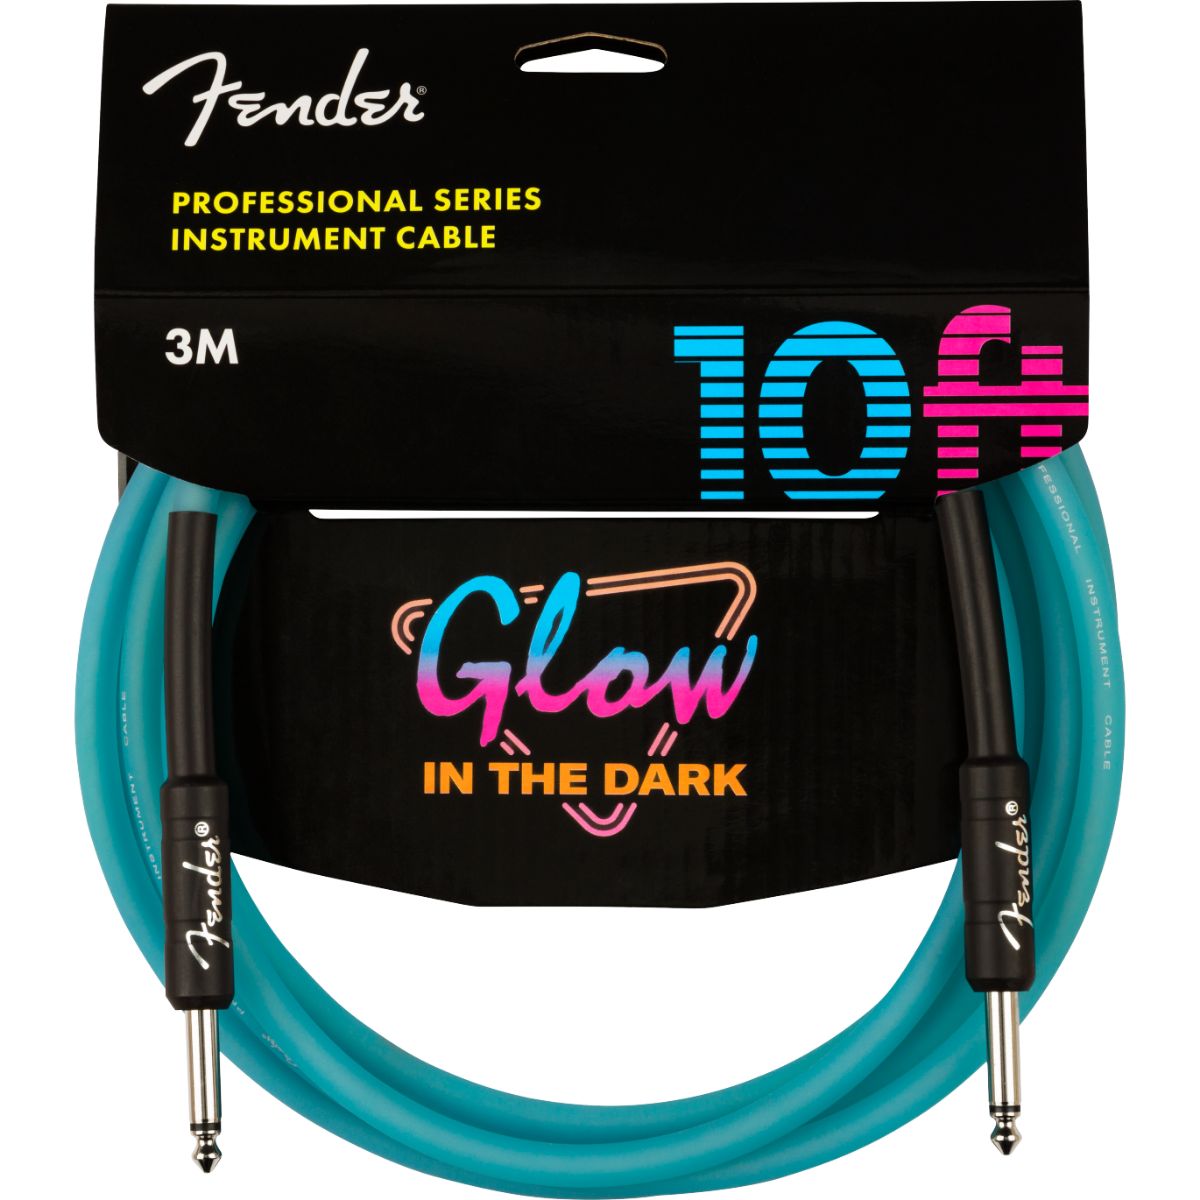 Fender Professional Glow in the Dark Cable